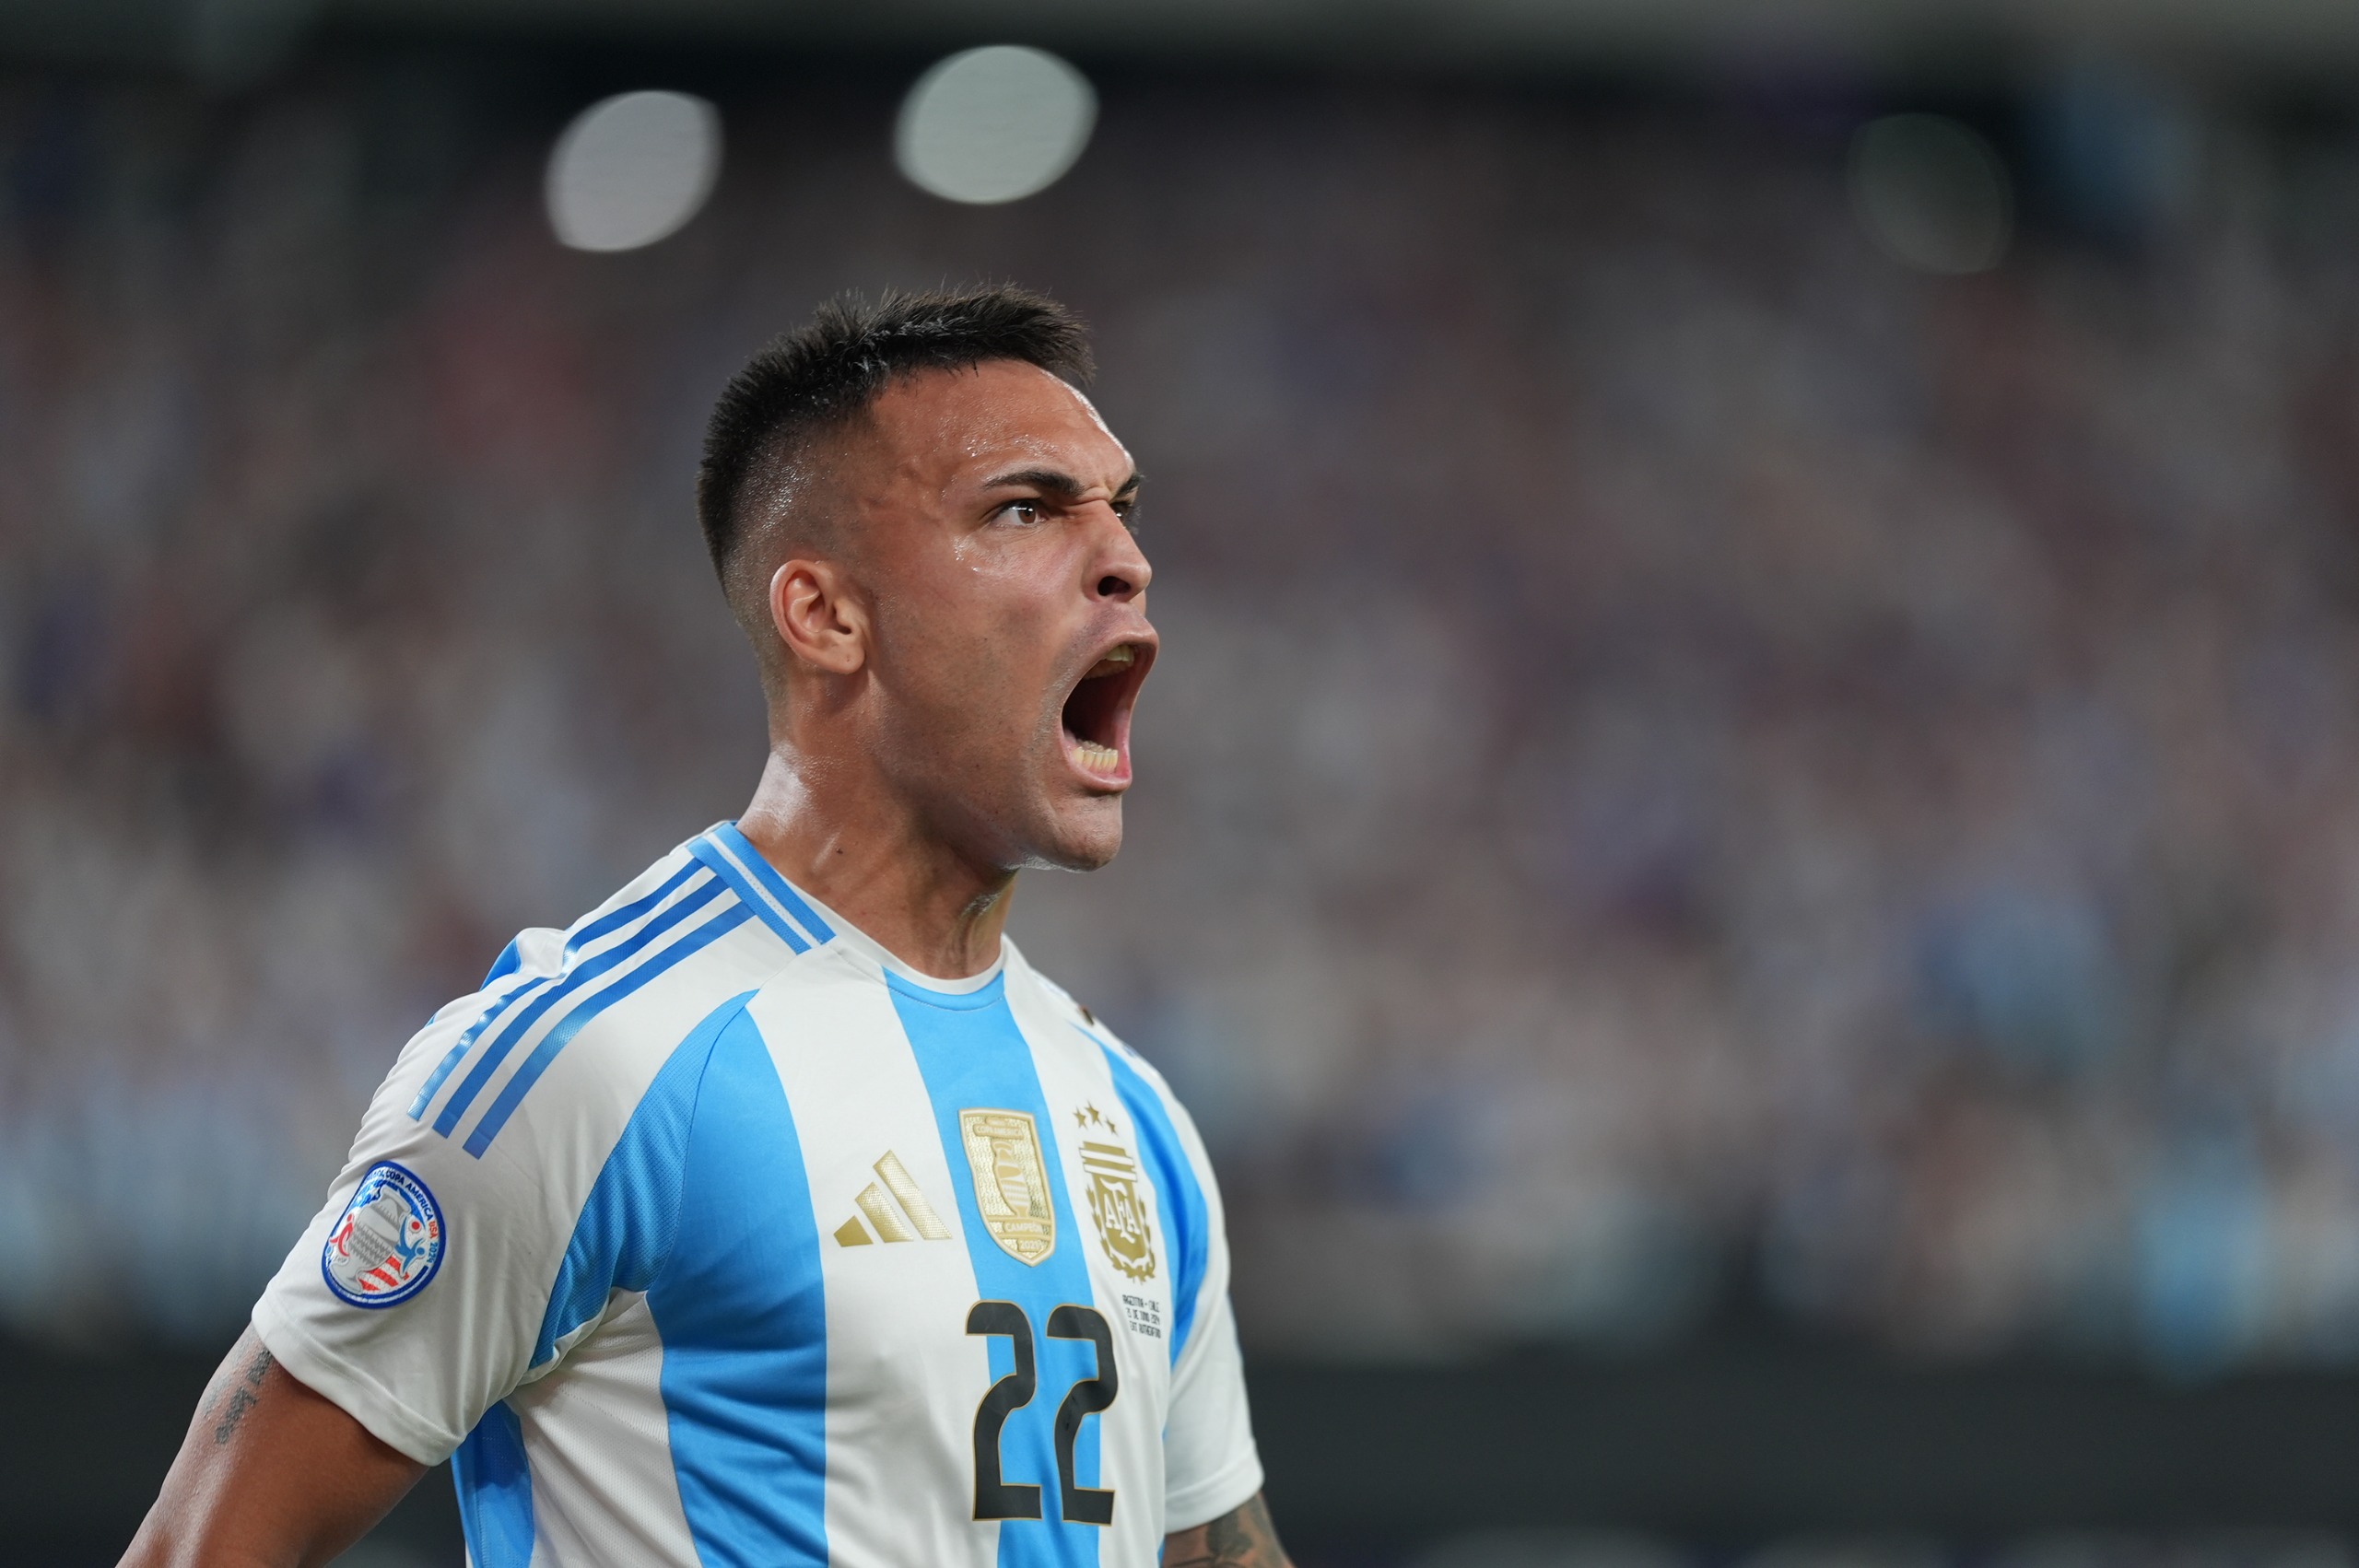 Copa América: Argentina on to quarterfinals after hard-fought 1-0 win against Chile